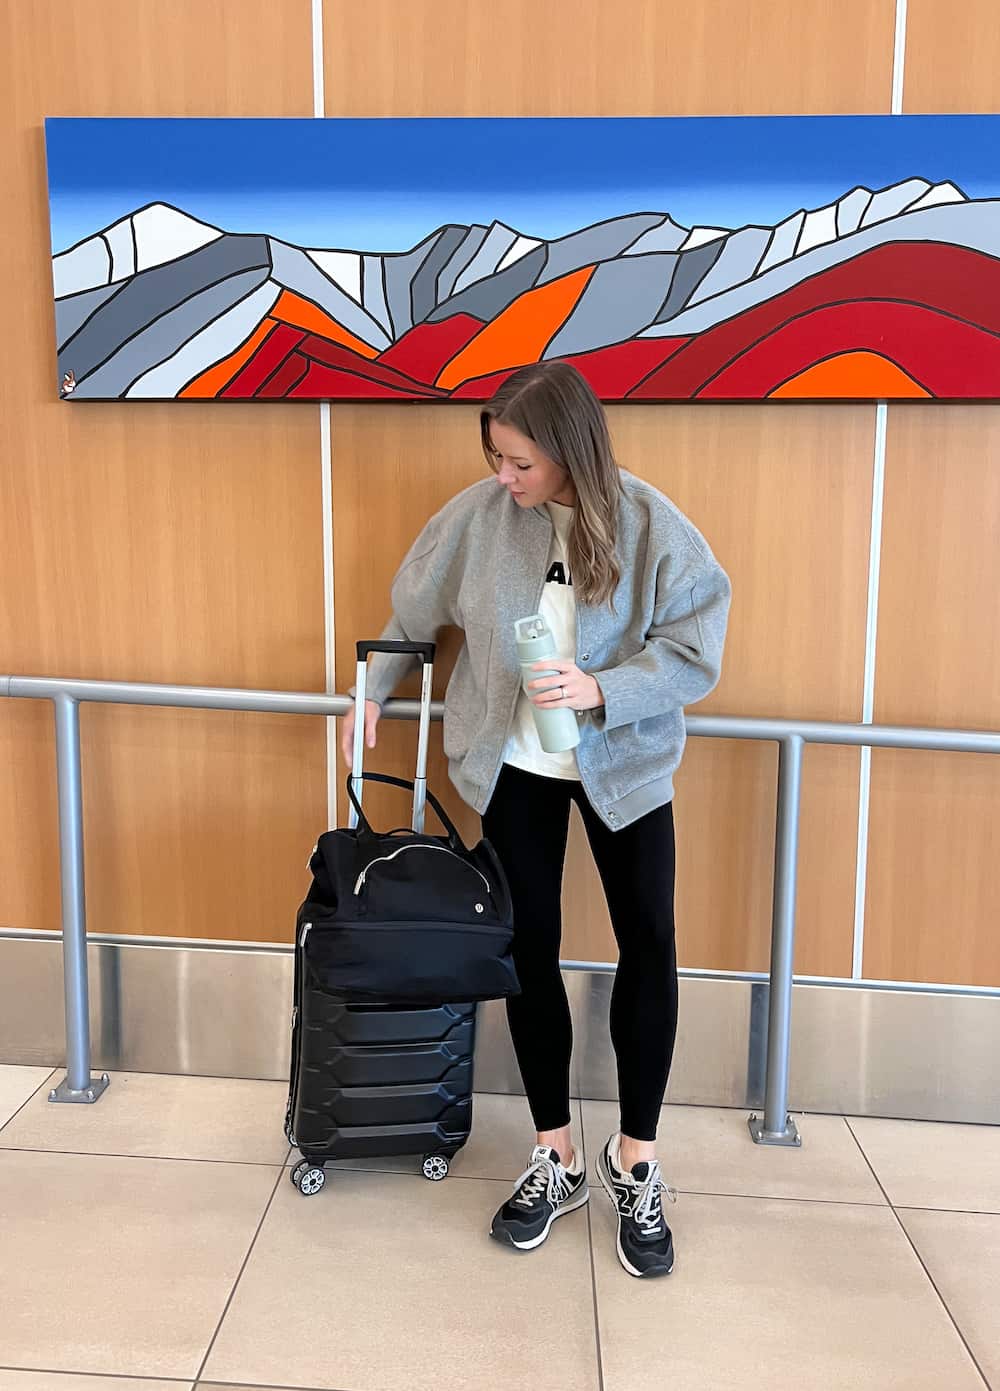 A woman at the airport wearing black leggings, a white graphic tee, a grey jacket, and black sneakers